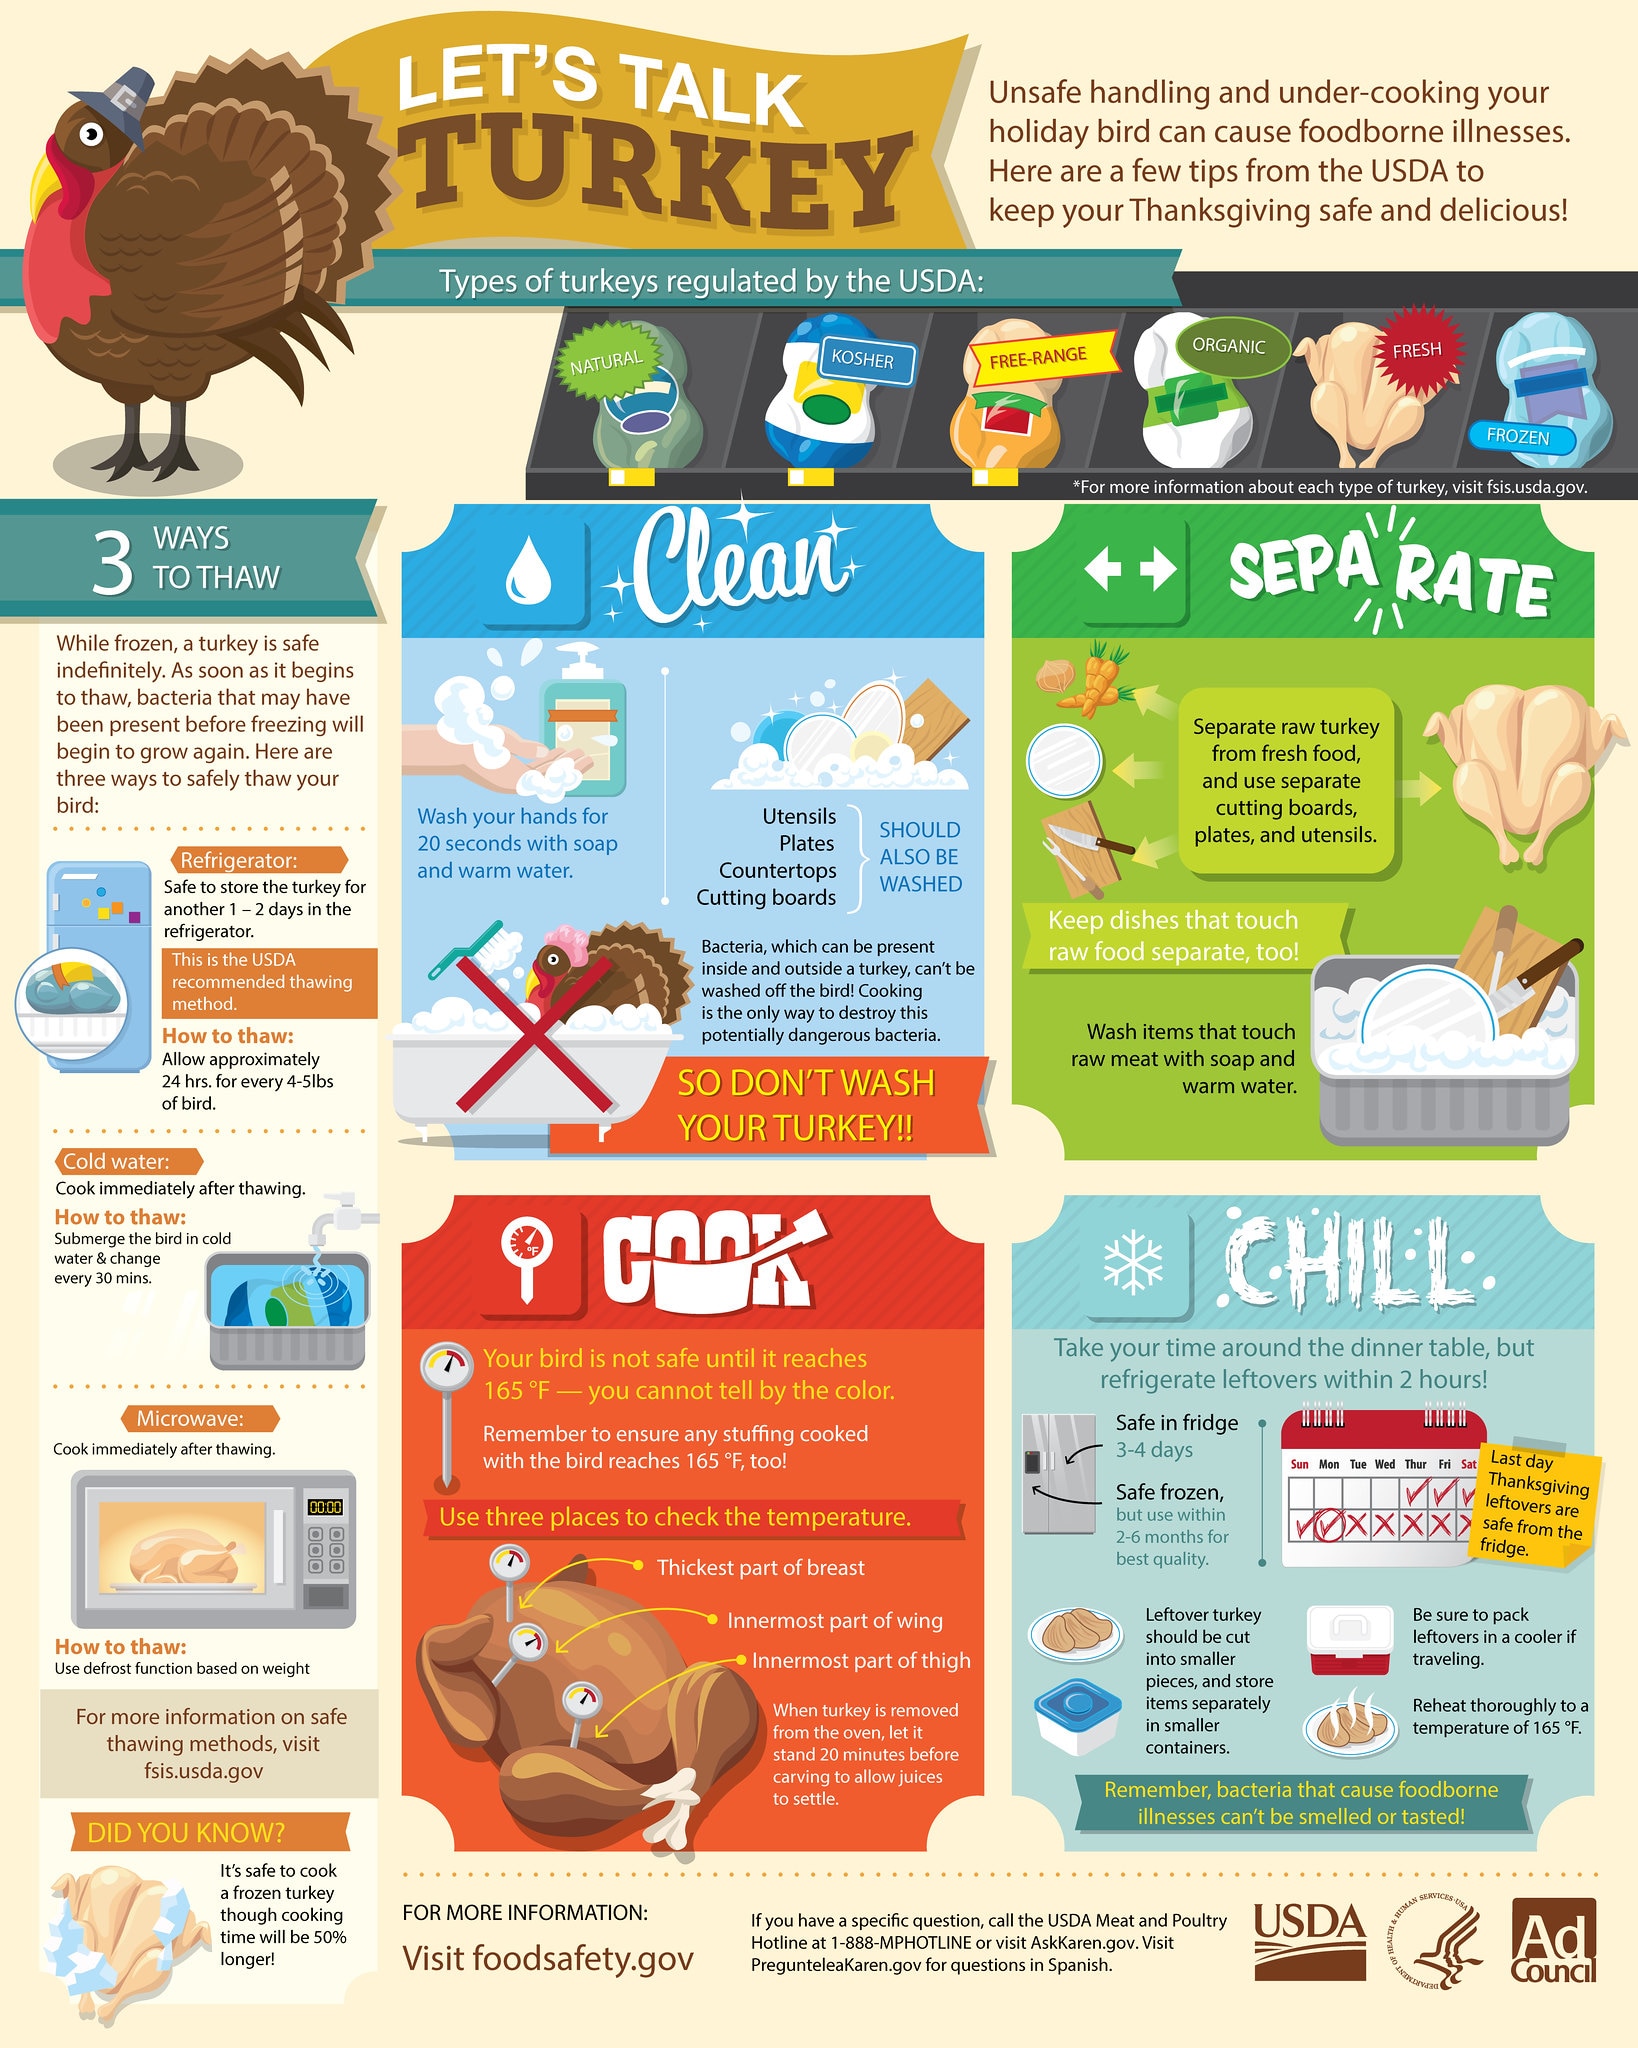 Infographic from FoodSafety.gov with tips for handling and cooking turkey and keeping your Thanksgiving safe and delicious.